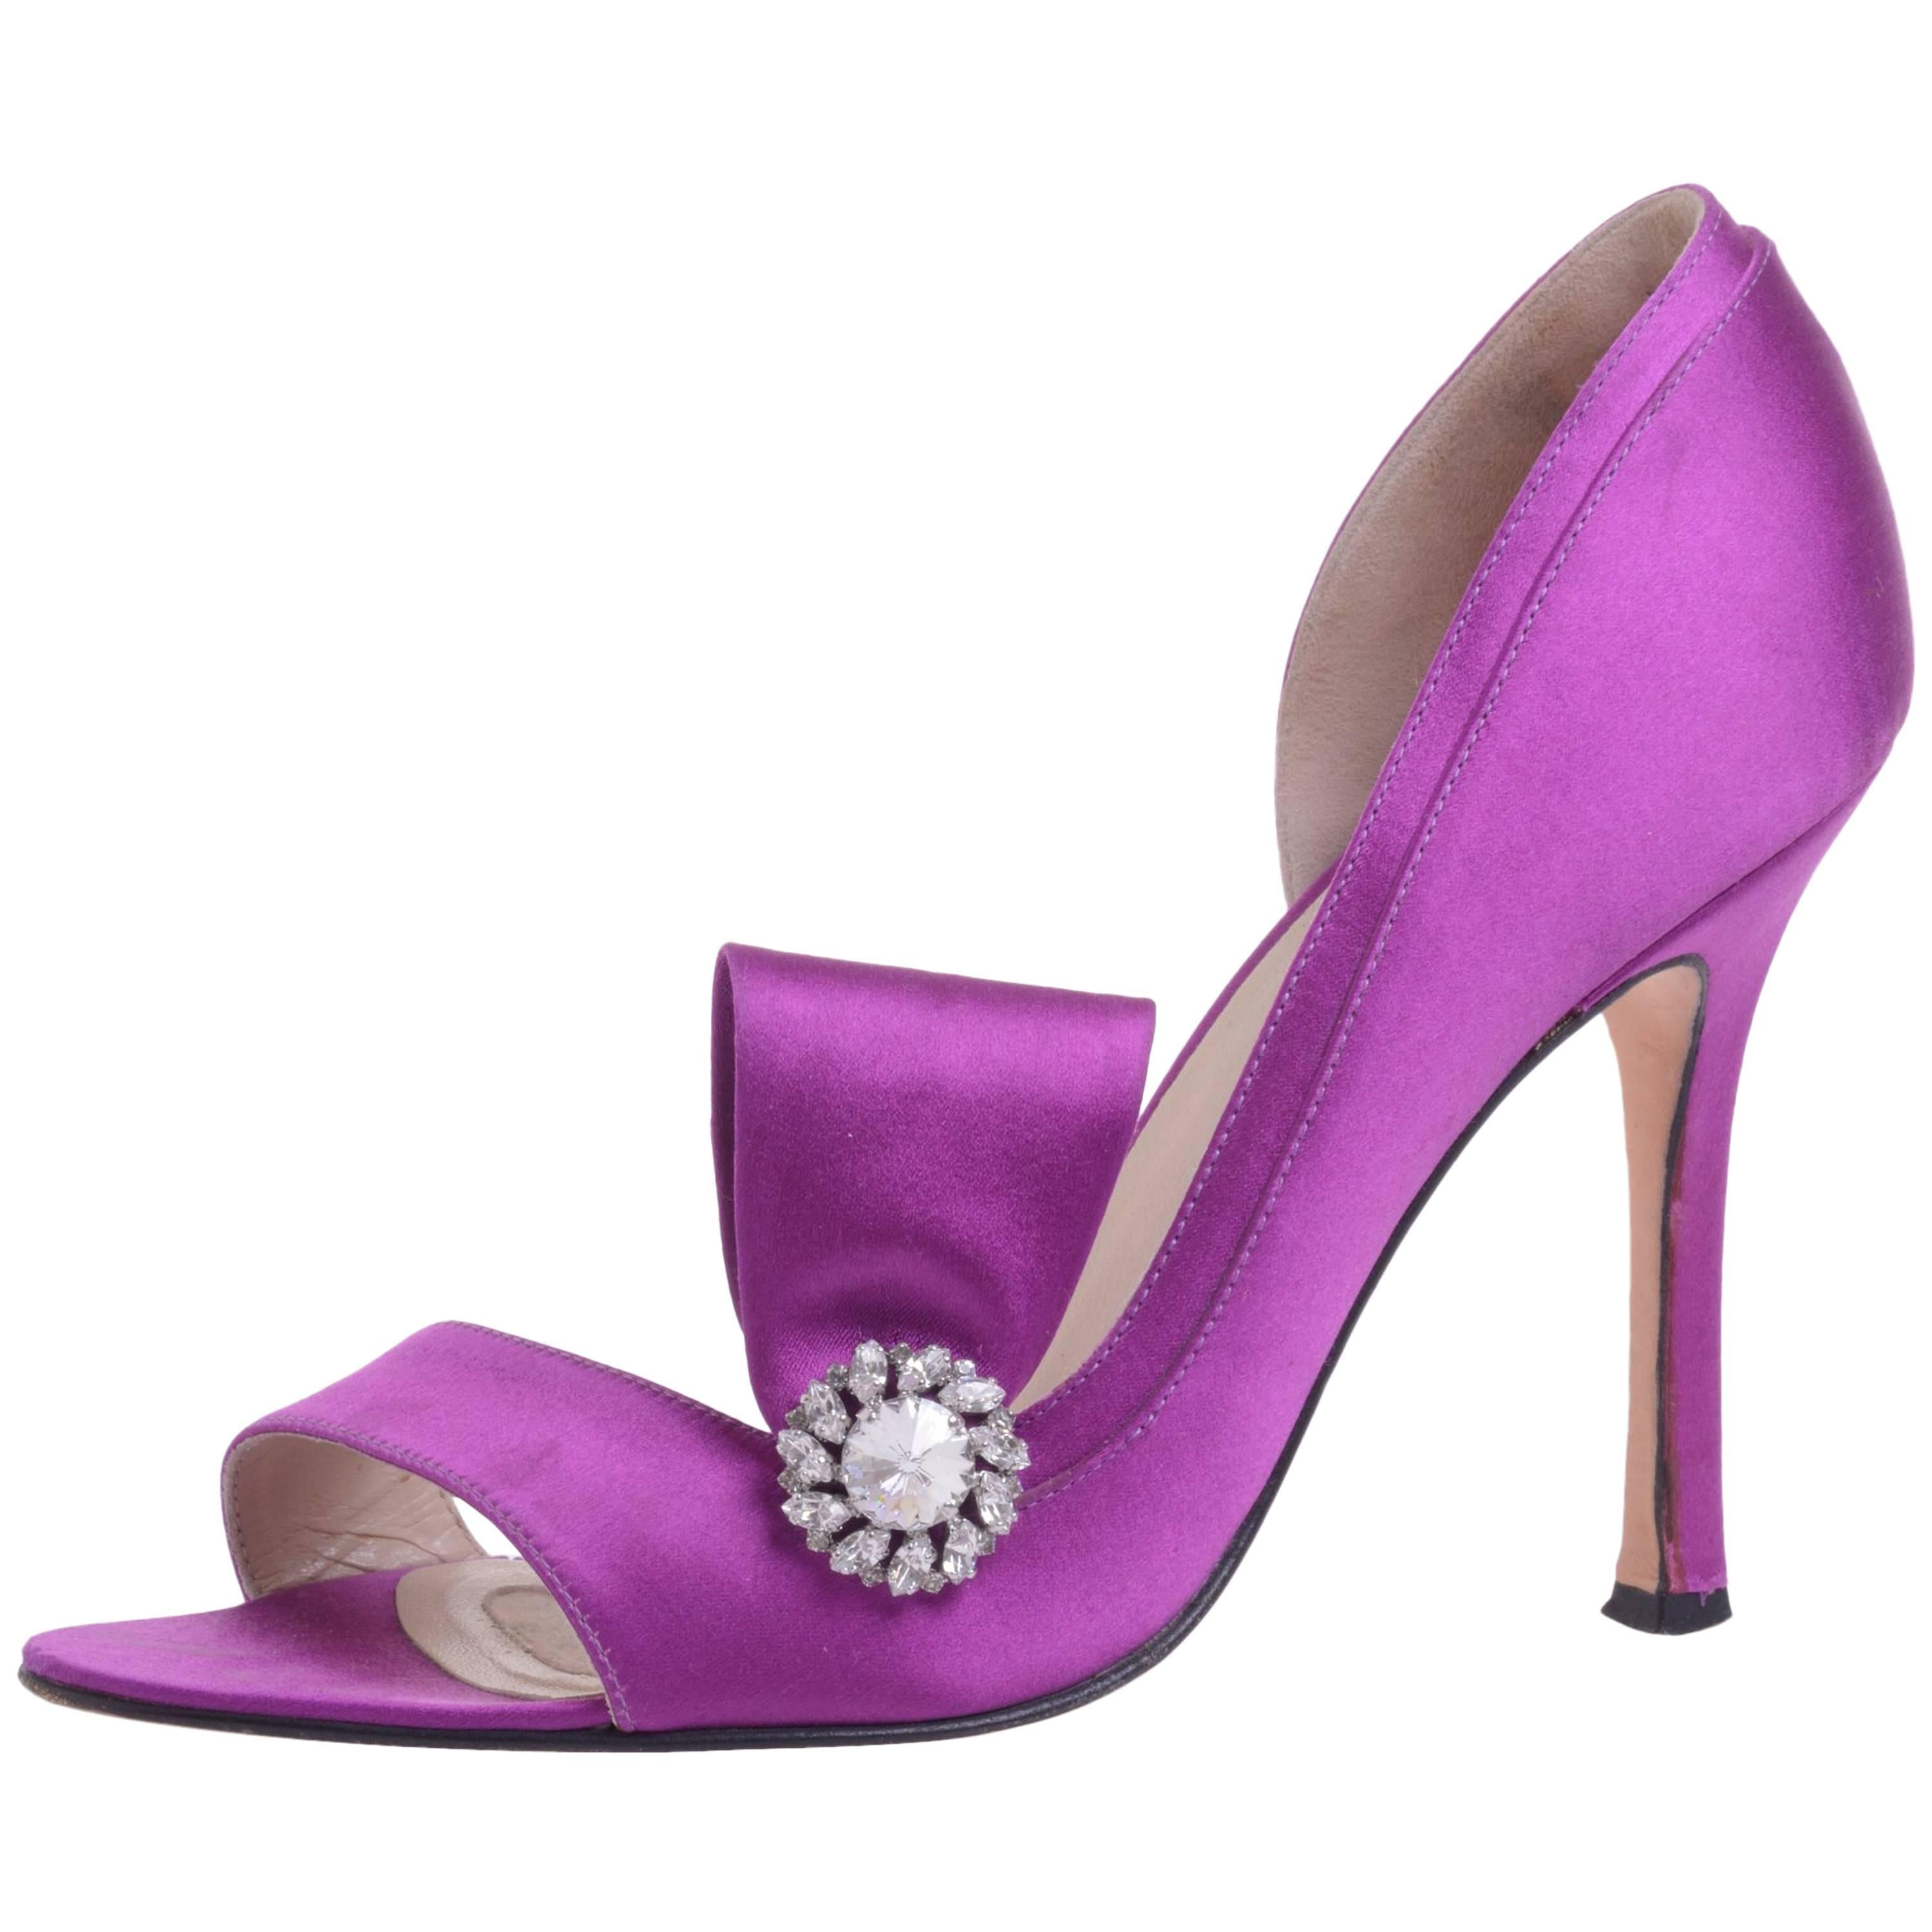 Brian Atwood d'Orsay Pump Shoes in Purple Satin  For Sale